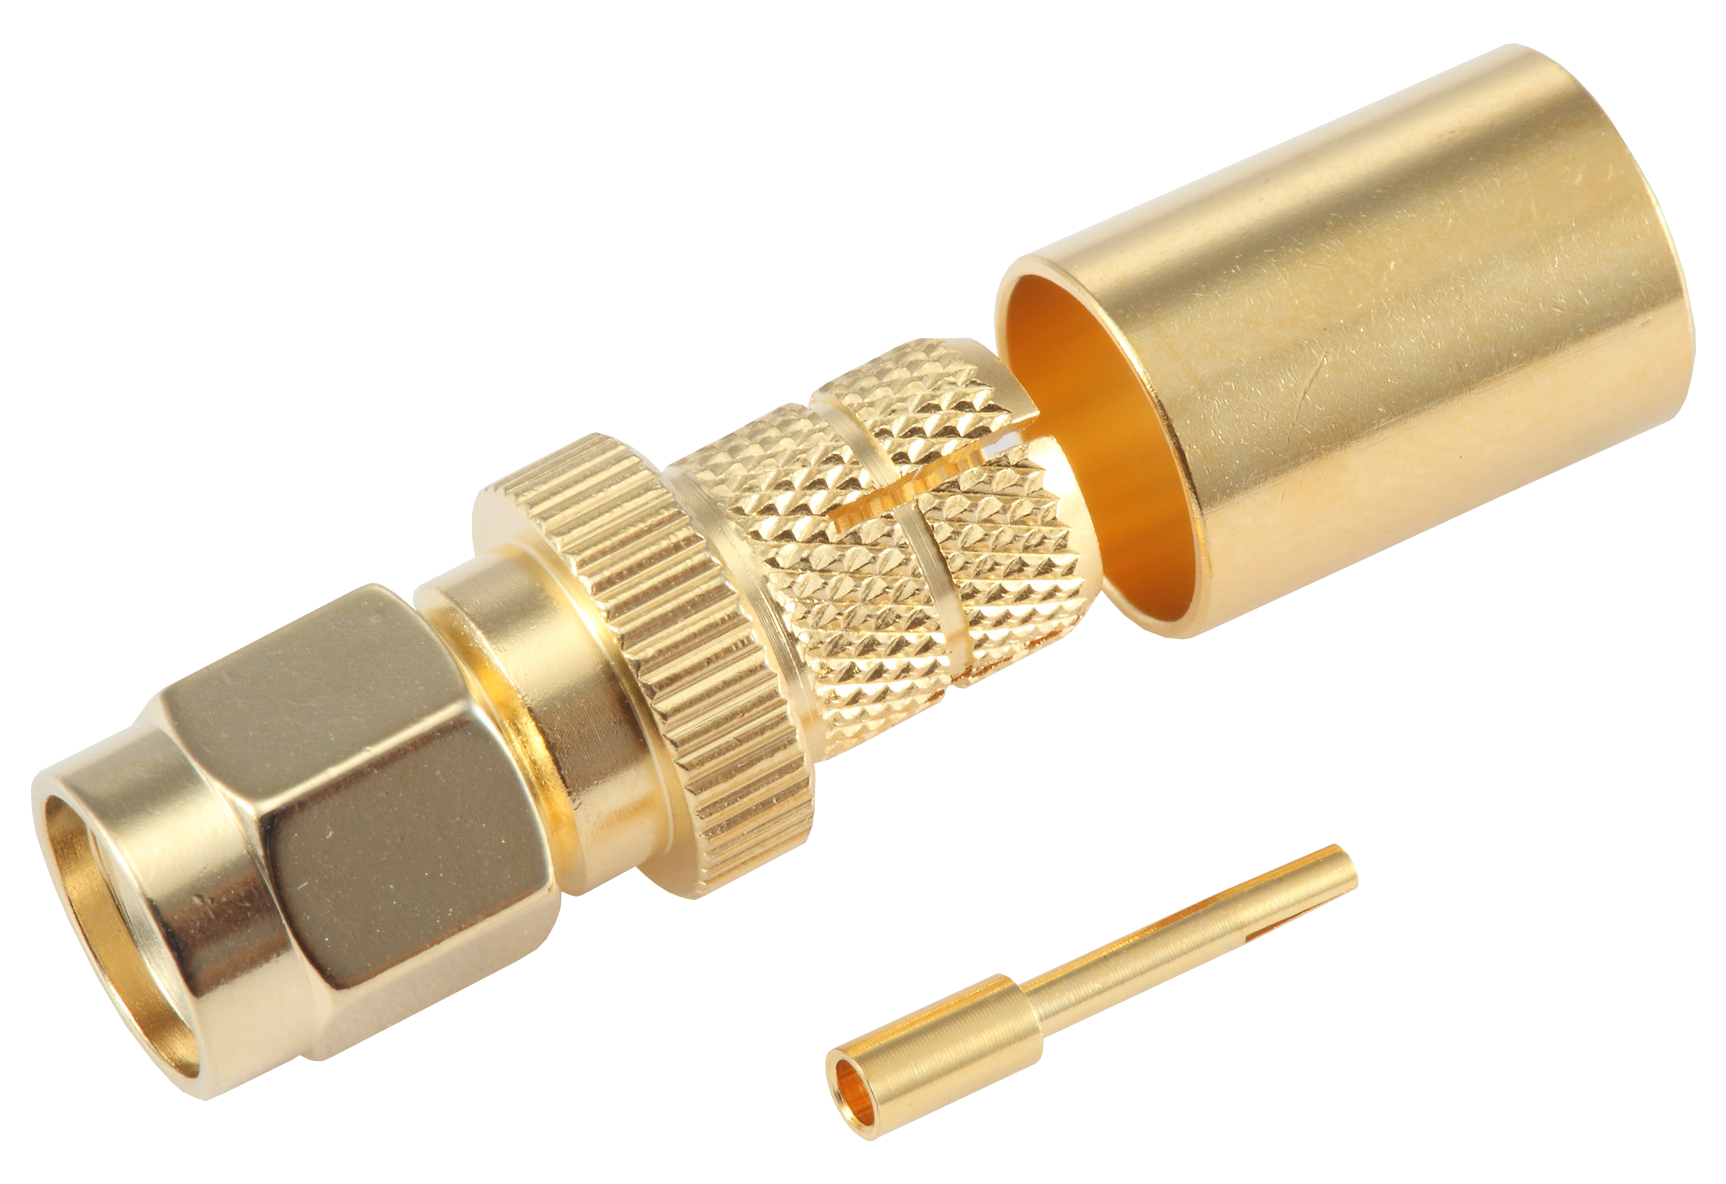 RP-SMA Male Connector for L-240 Cable, Solder Contact | R-Spectrum